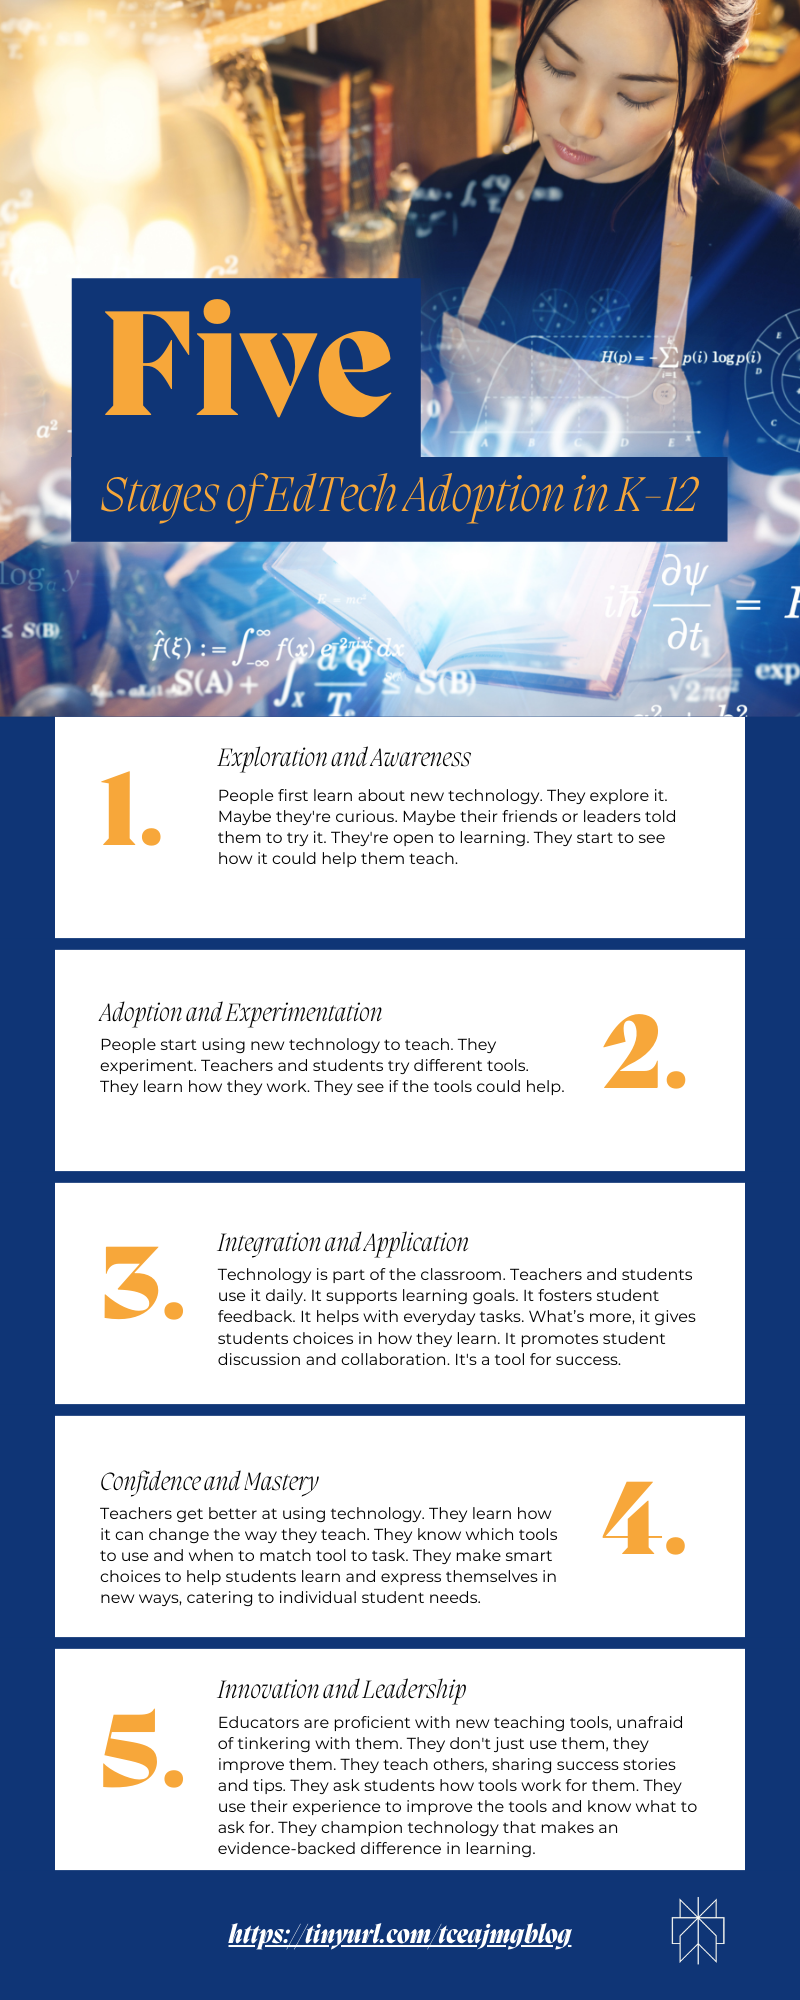 Five Stages of EdTech Adoption infographic showing the five stages educators go through as they move toward ed tech adoption in their classroom.